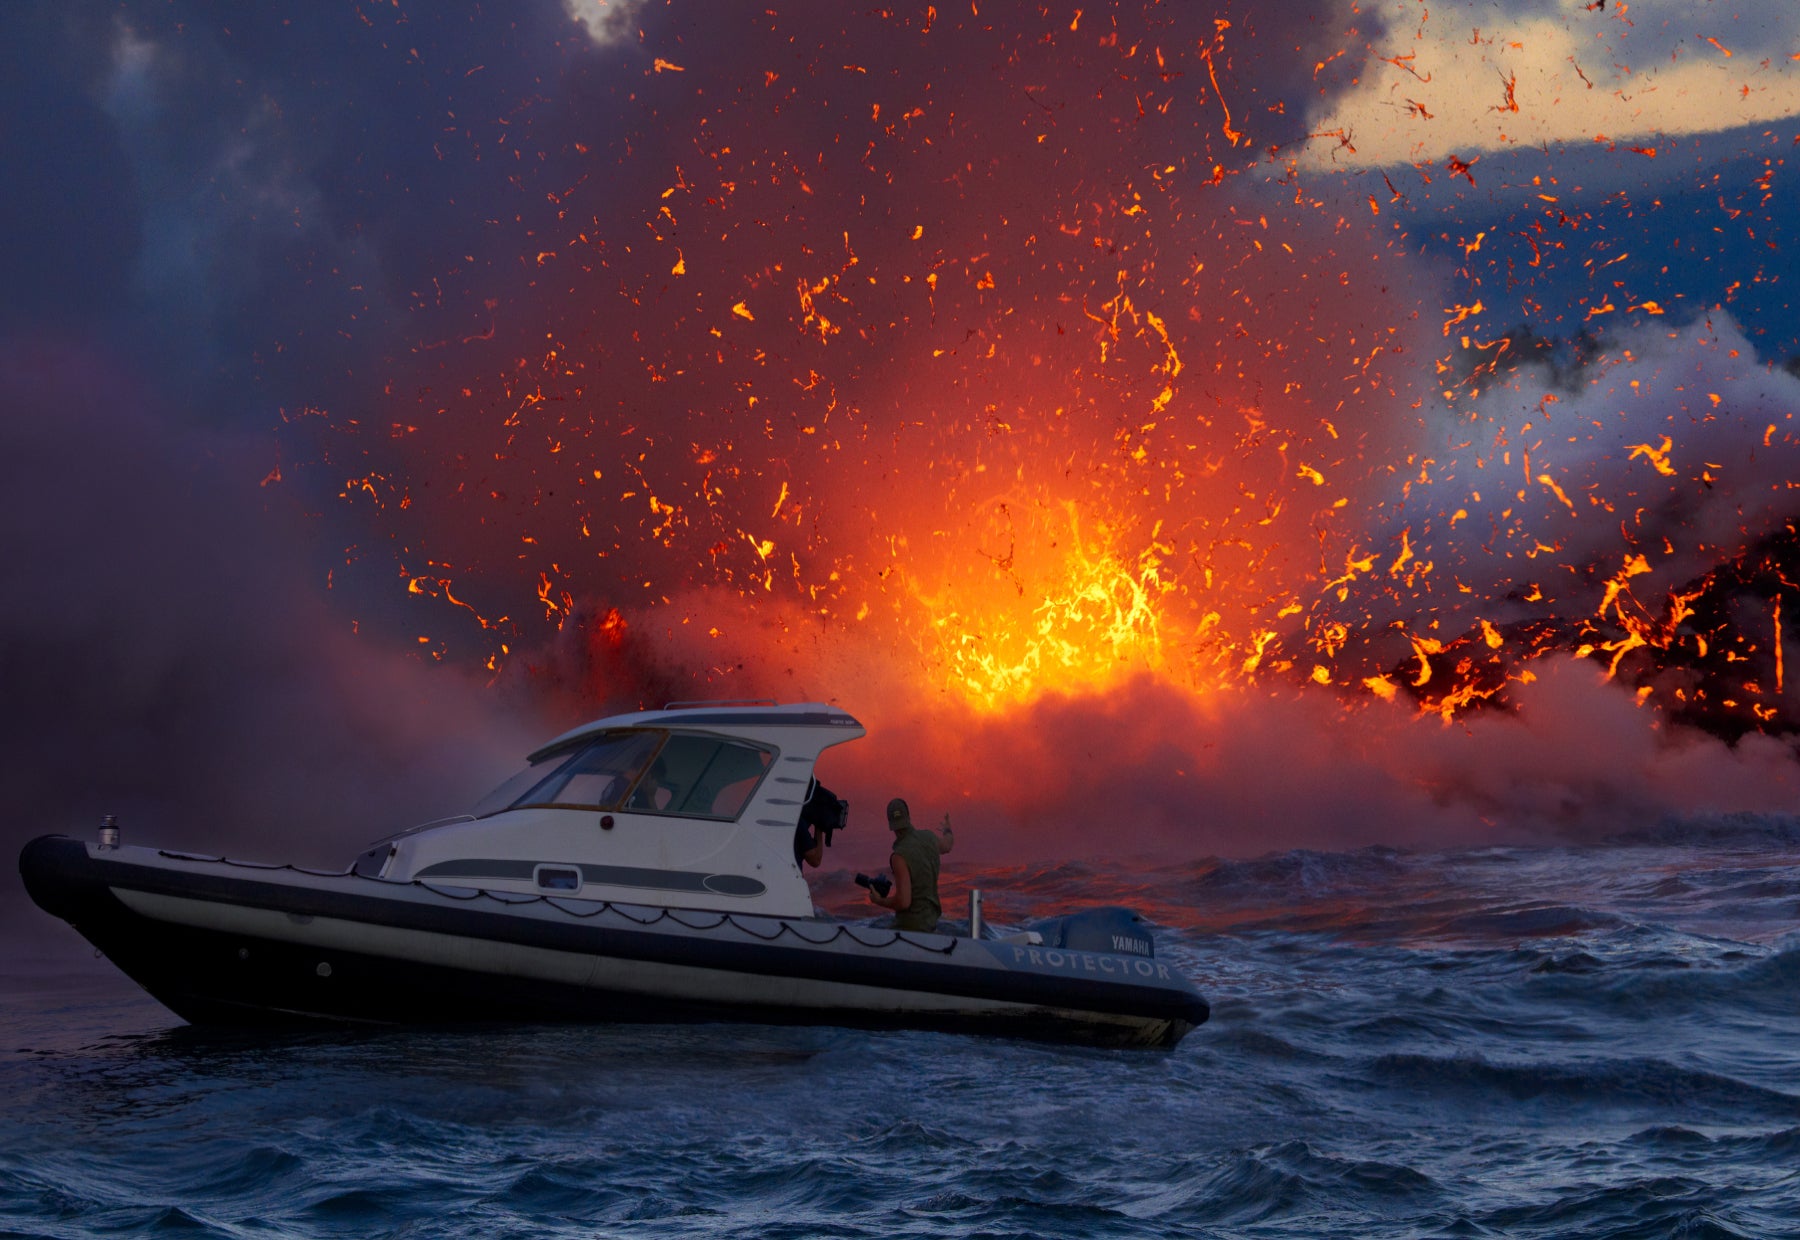 Silhouetted portrait of Peter Lik standing on the back of a boat off the coast of Hawaii as explosions of hot lava pour into the ocean in the background